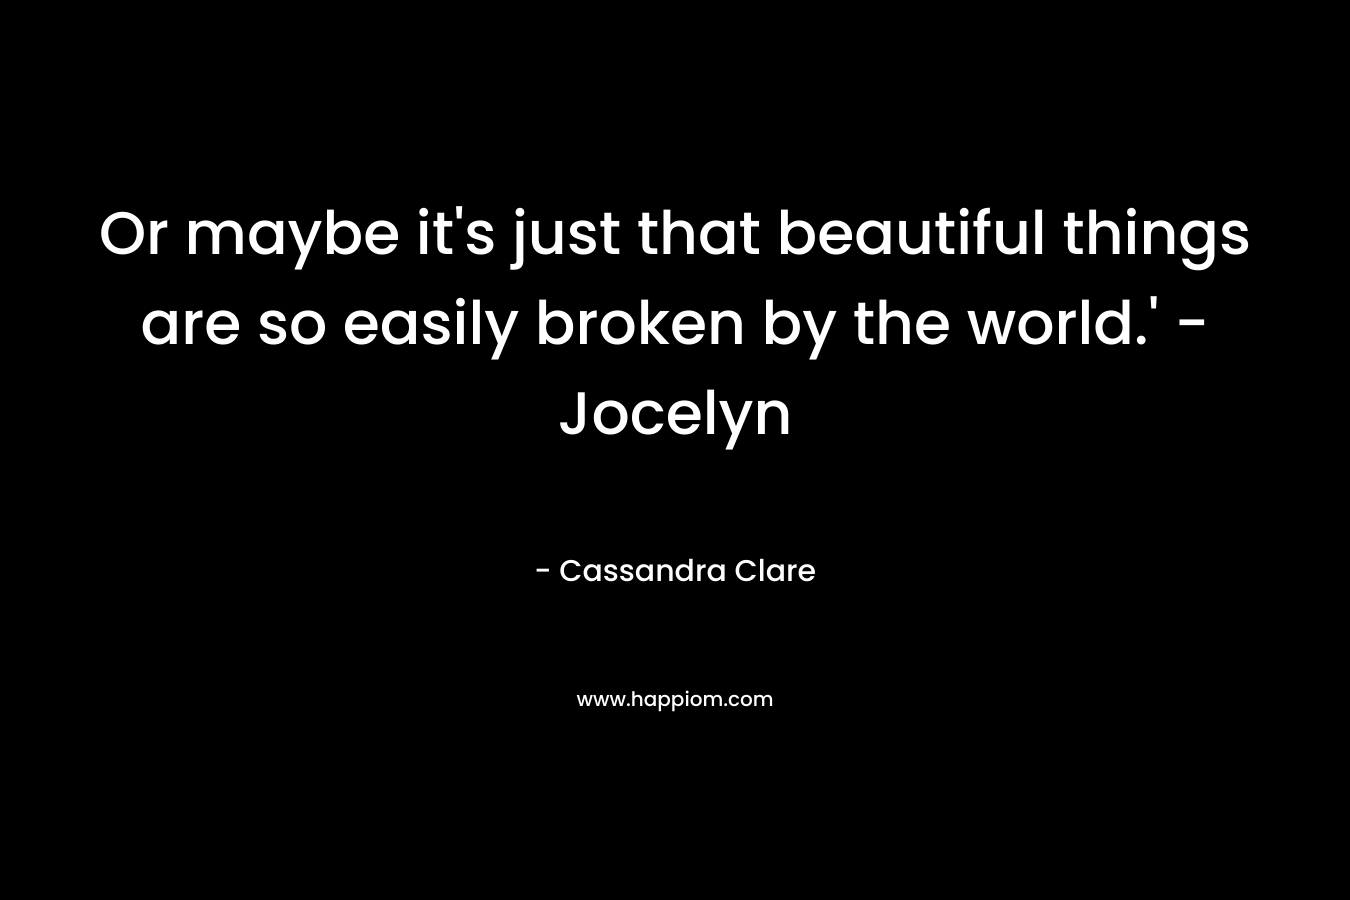 Or maybe it's just that beautiful things are so easily broken by the world.' - Jocelyn